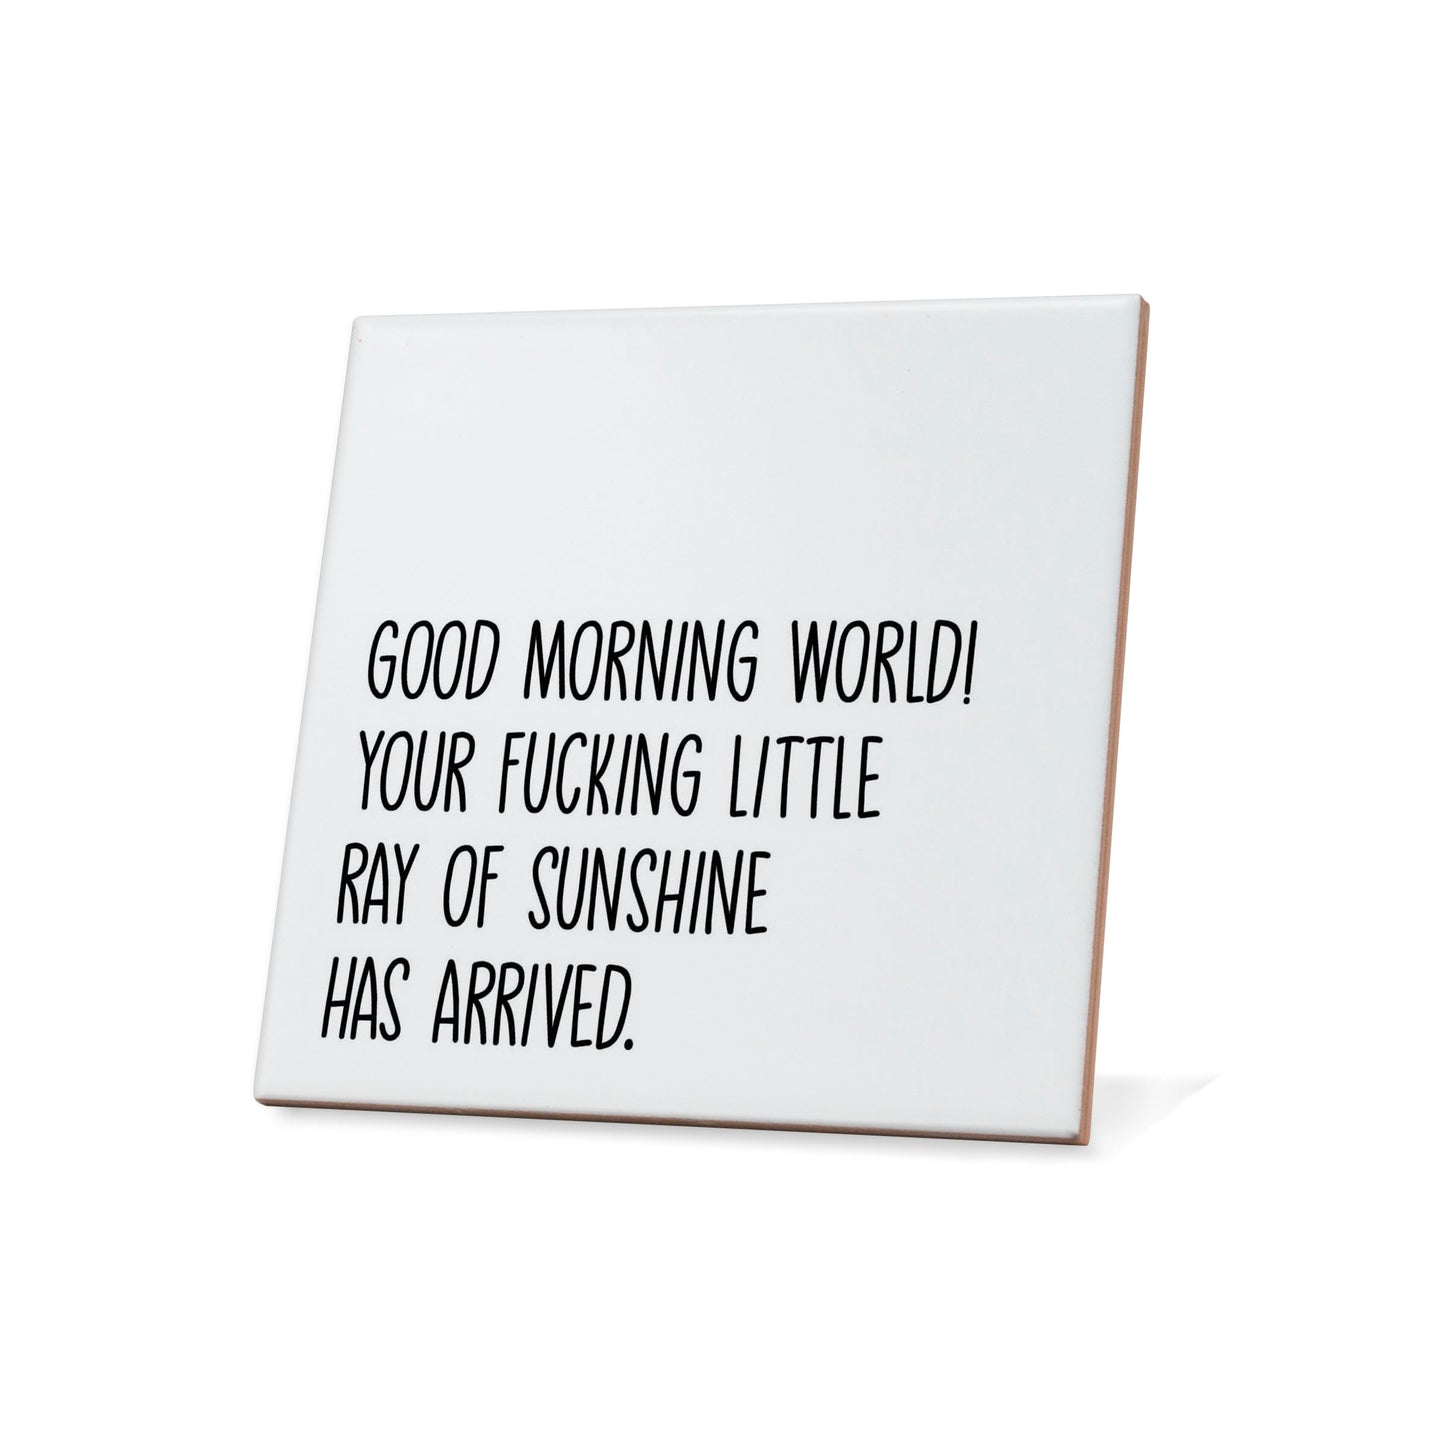 Good Morning World! Your fucking little ray of sarcastic sunshine has arrived. Quote Coaster